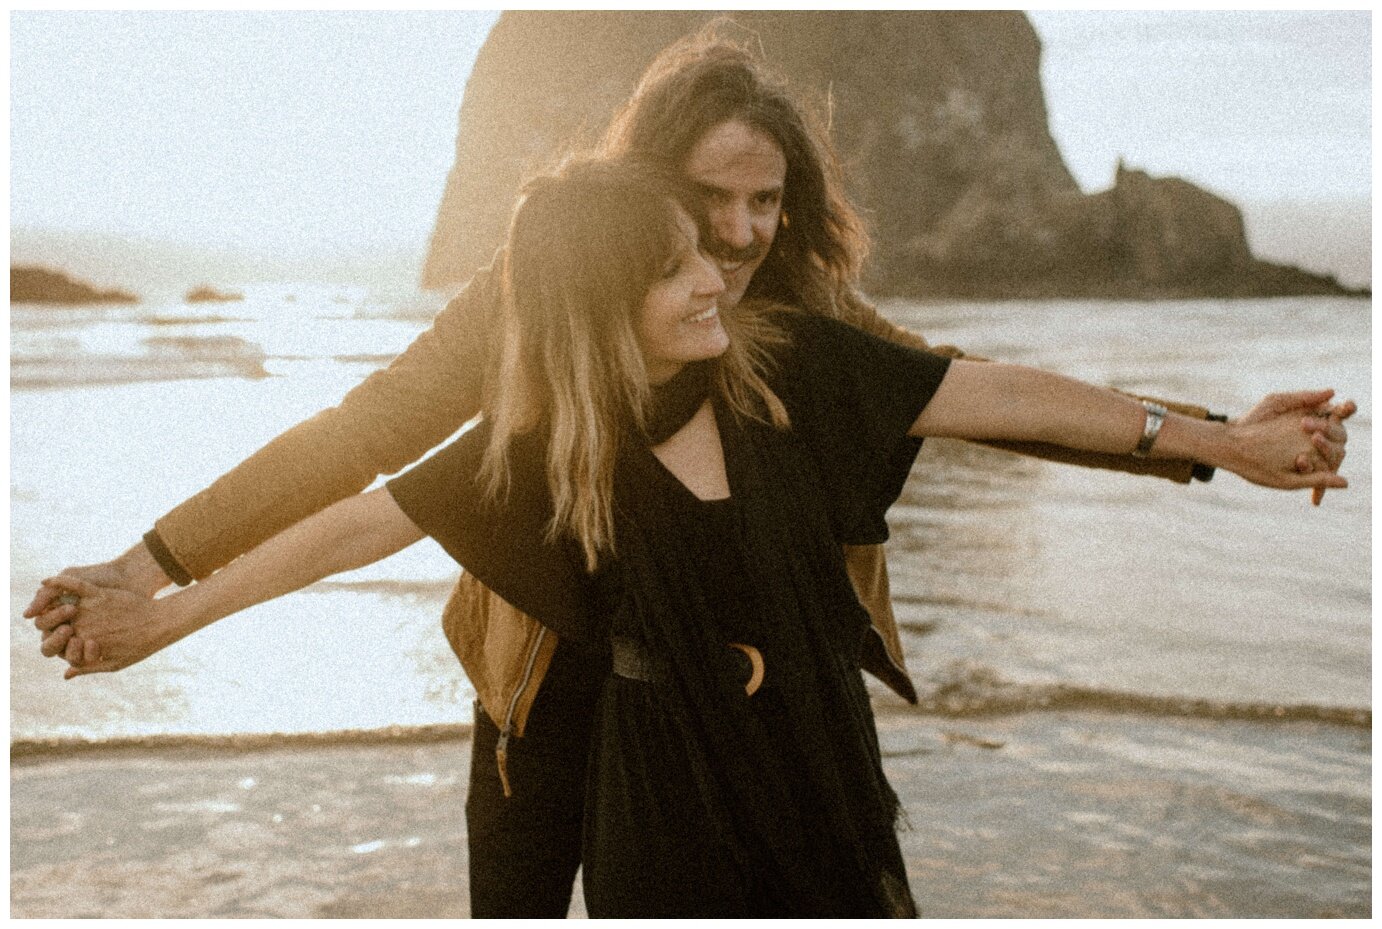 Engagement Session at Cannon Beach - Madeline Rose Photography - PNW Elopement Photographer_0025.jpg